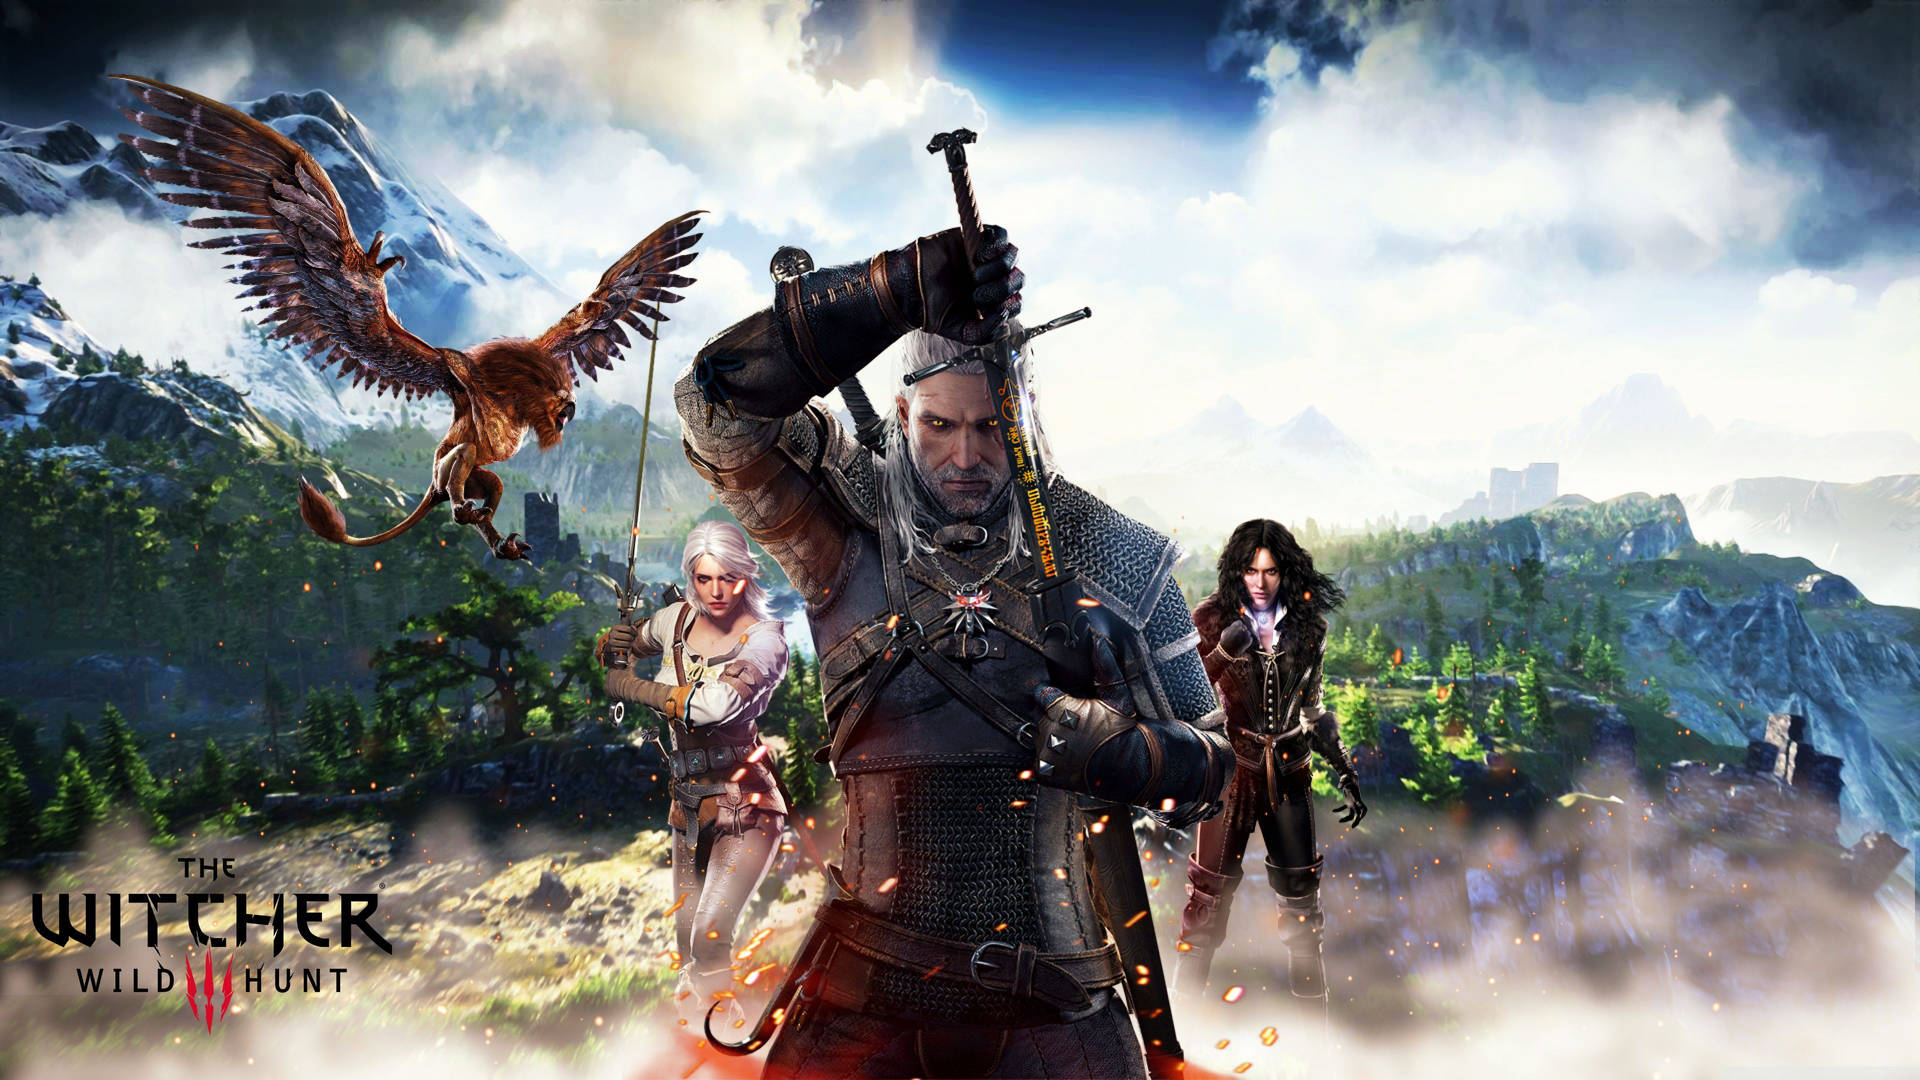 Catch the Wild Hunt with The Witcher Wallpaper